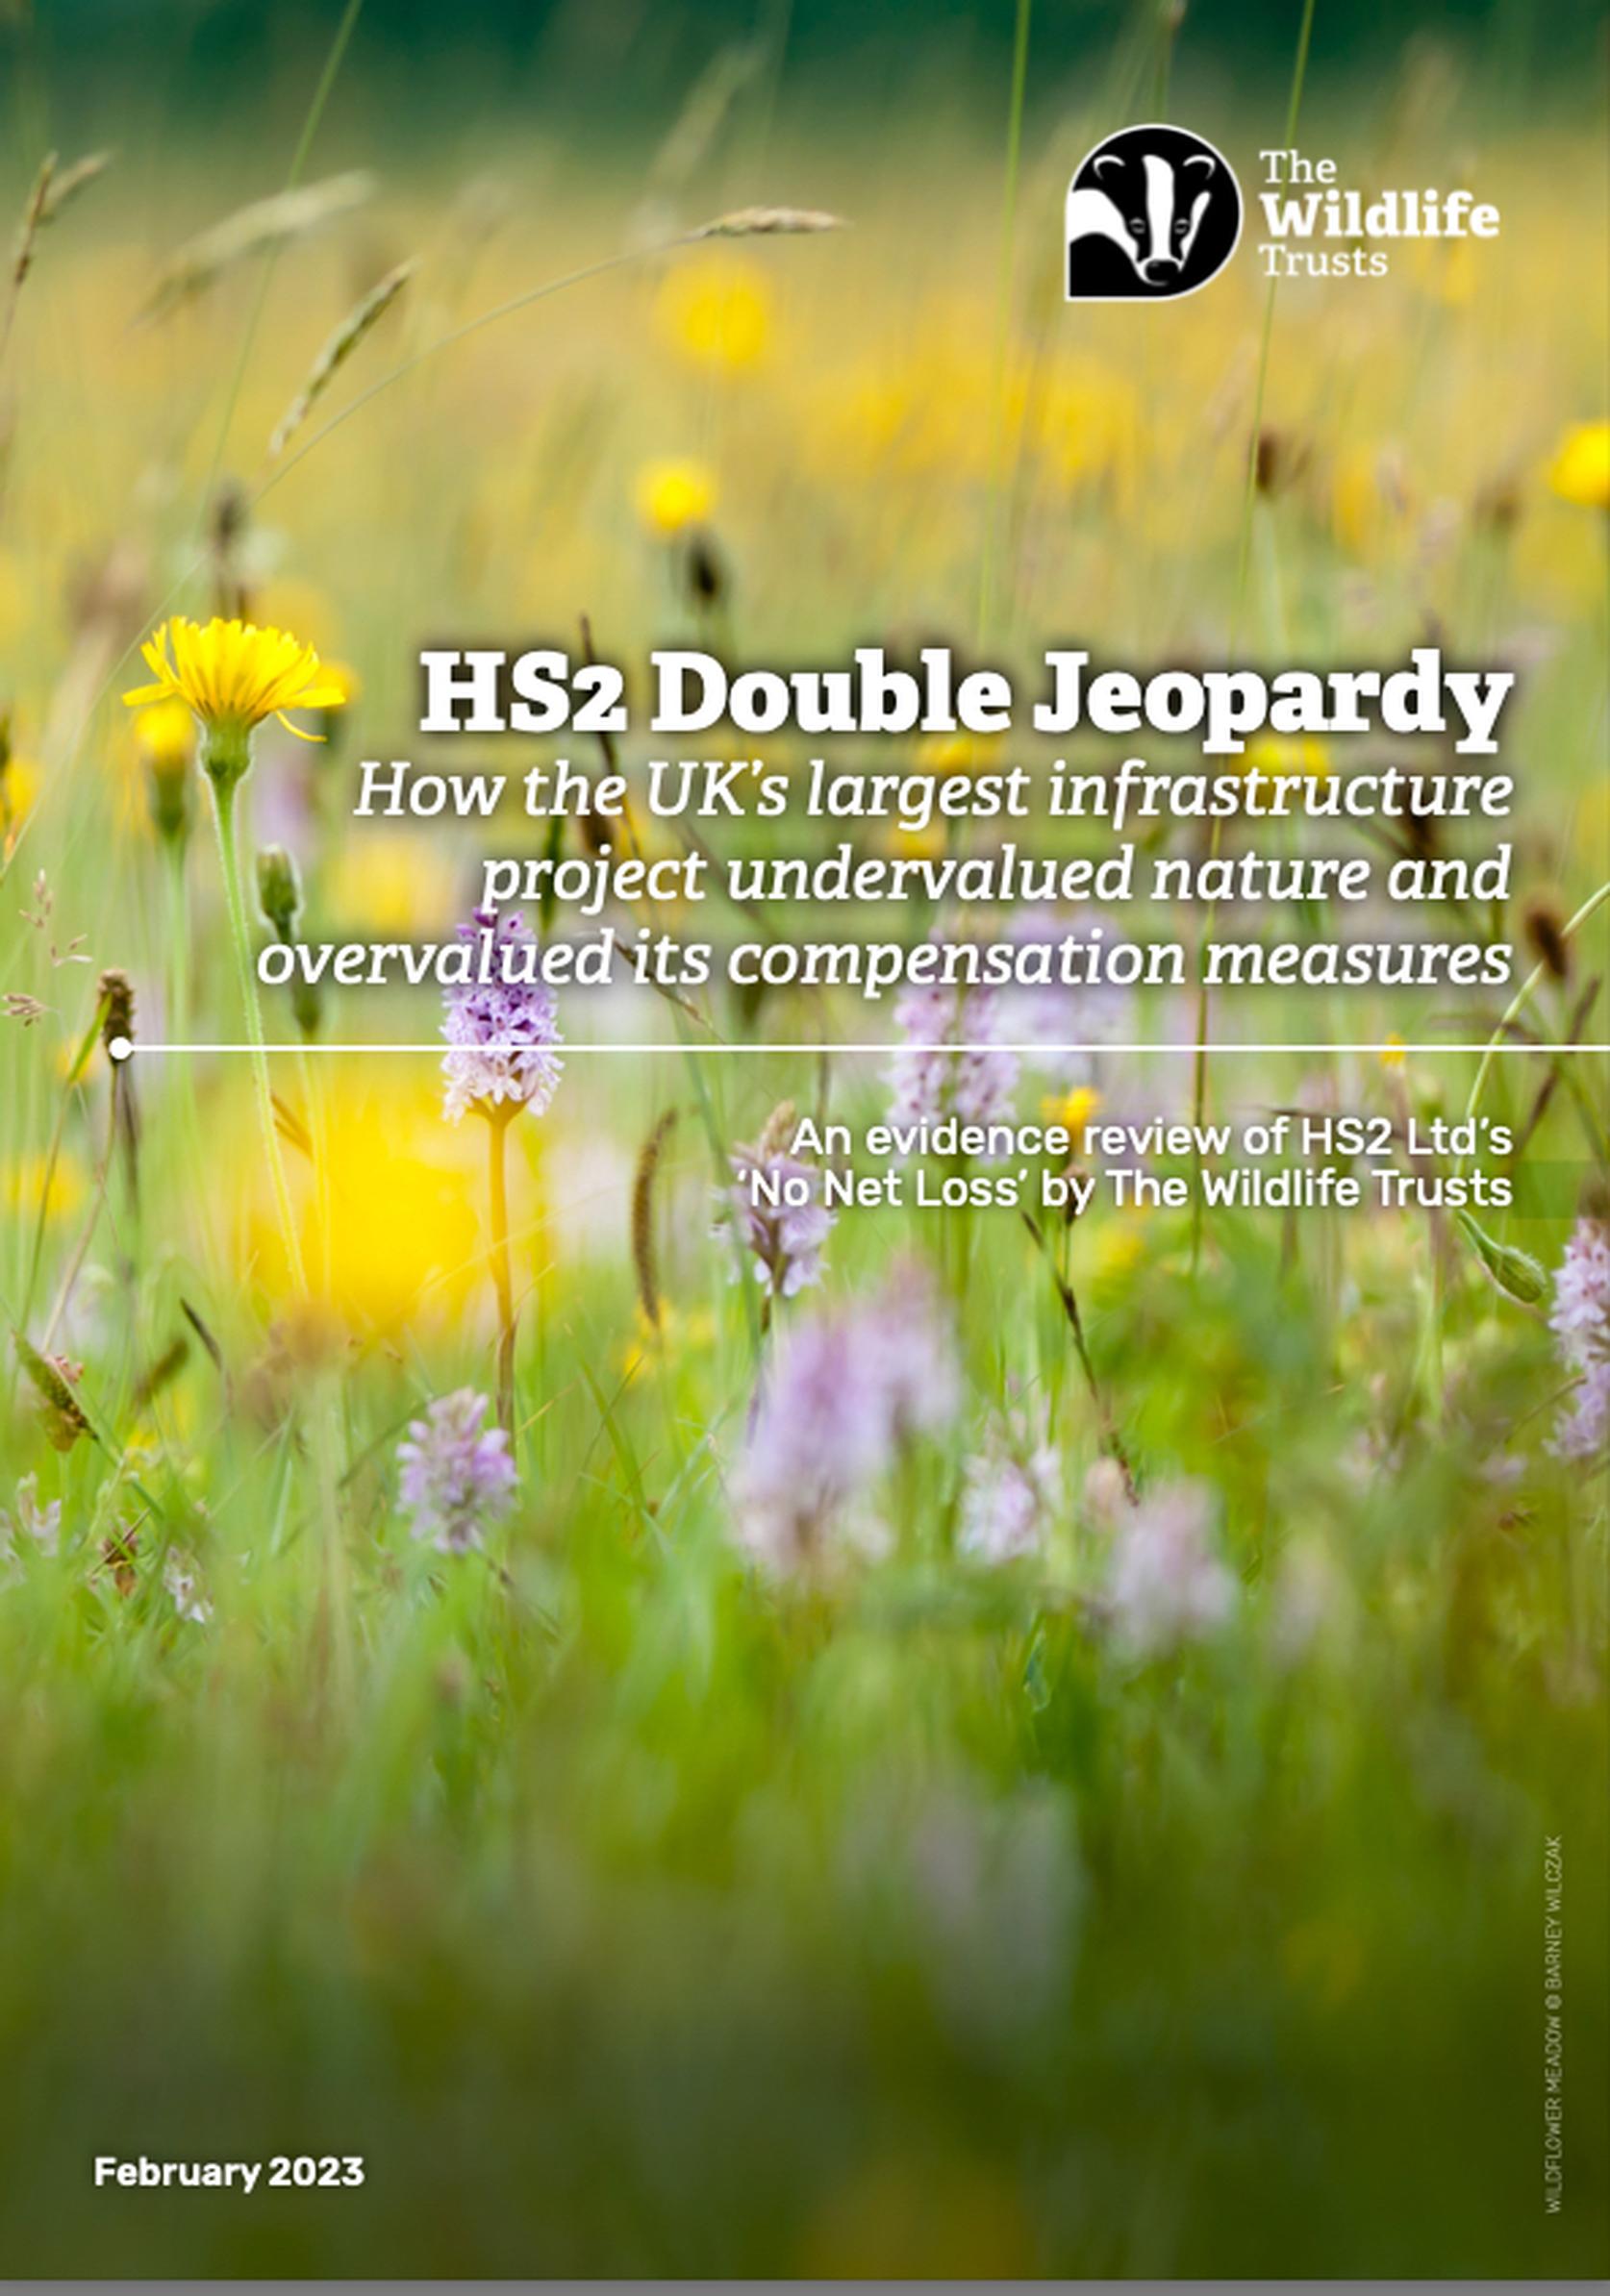 New report for the Wildlife Trusts claims HS2 Ltd has hugely undervalued natural habitats and the wildlife that is being affected by construction along the route –